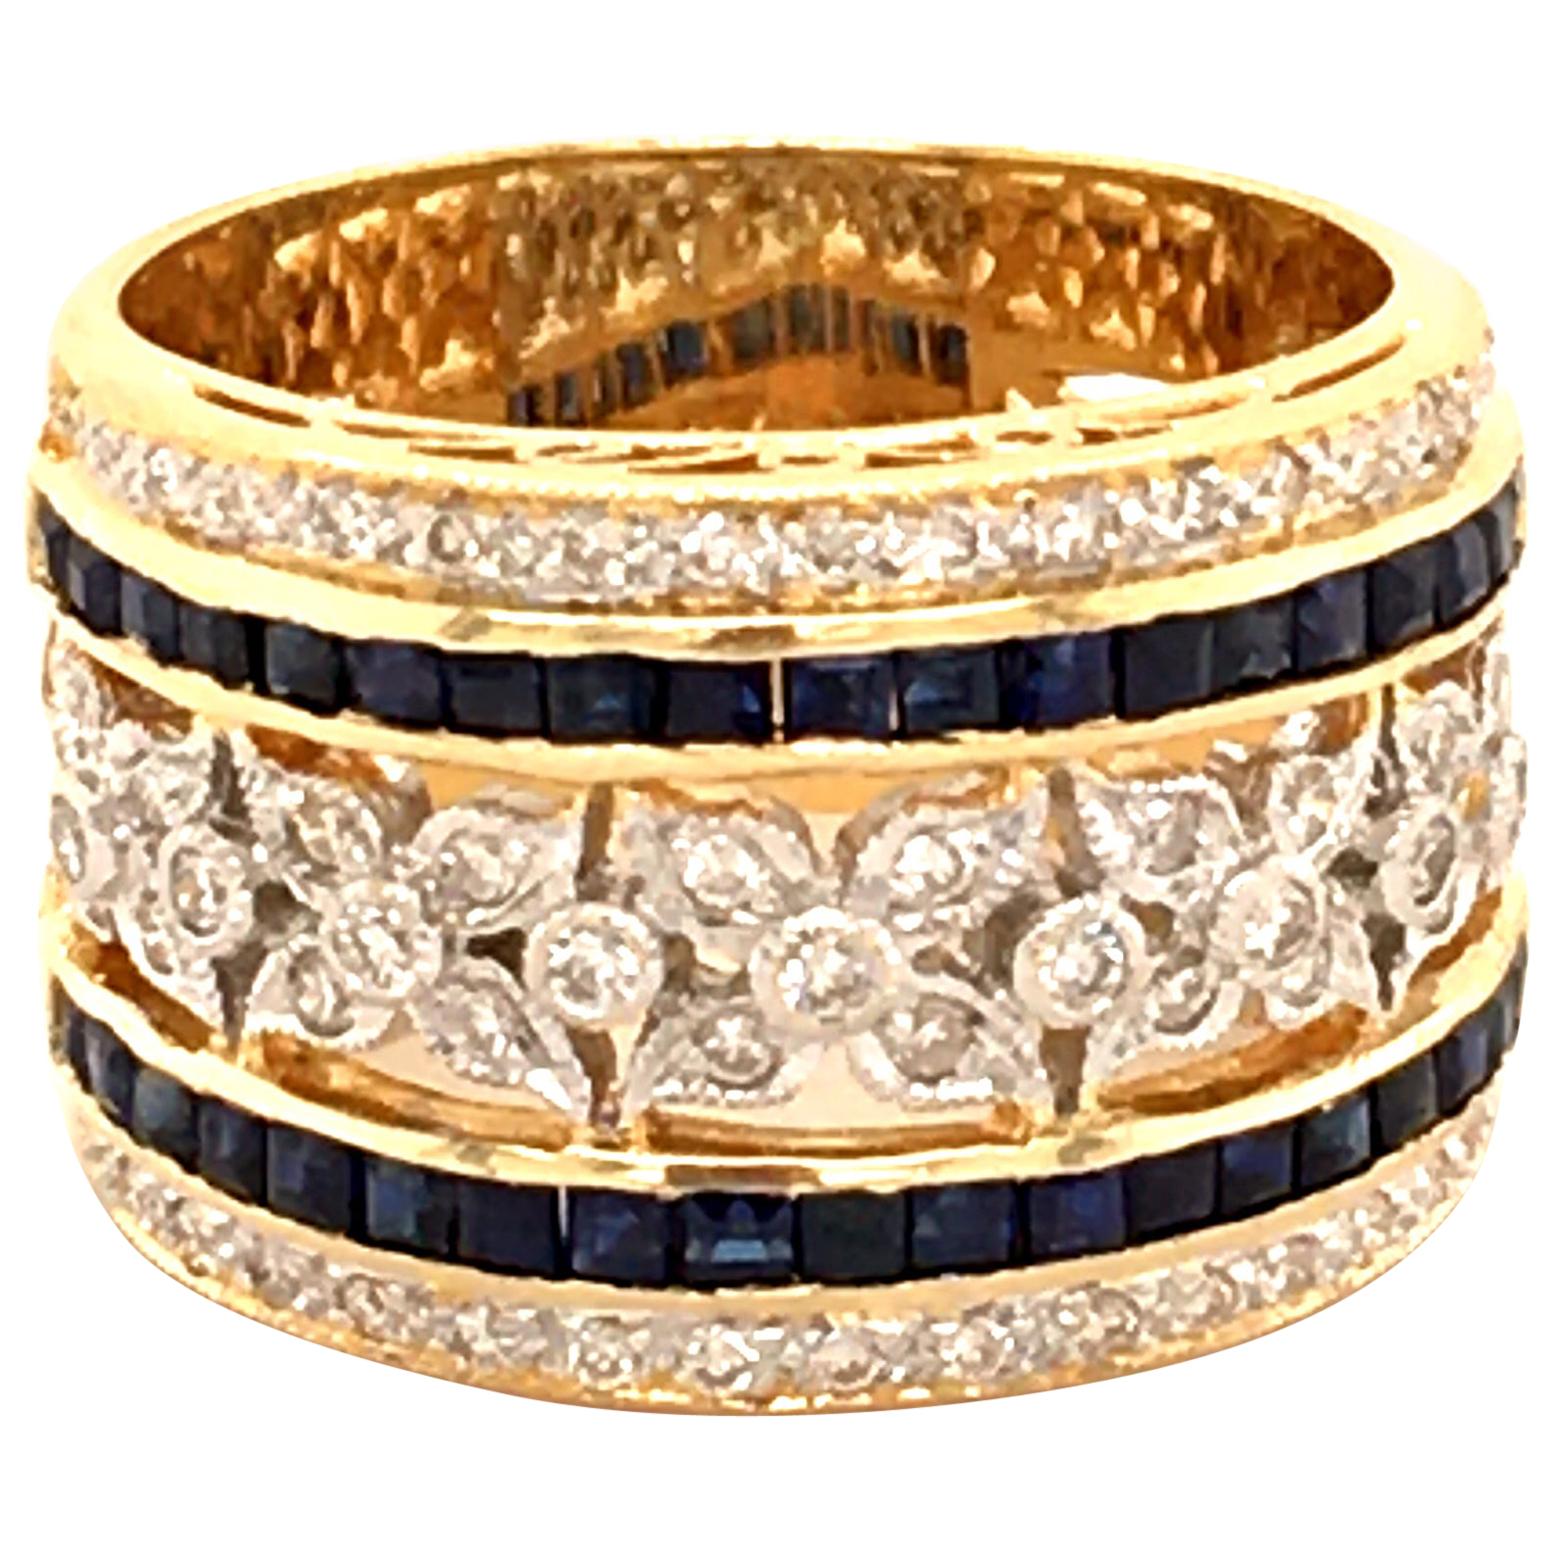 Sapphire and Diamond Ring in 18 Karat Yellow and White Gold